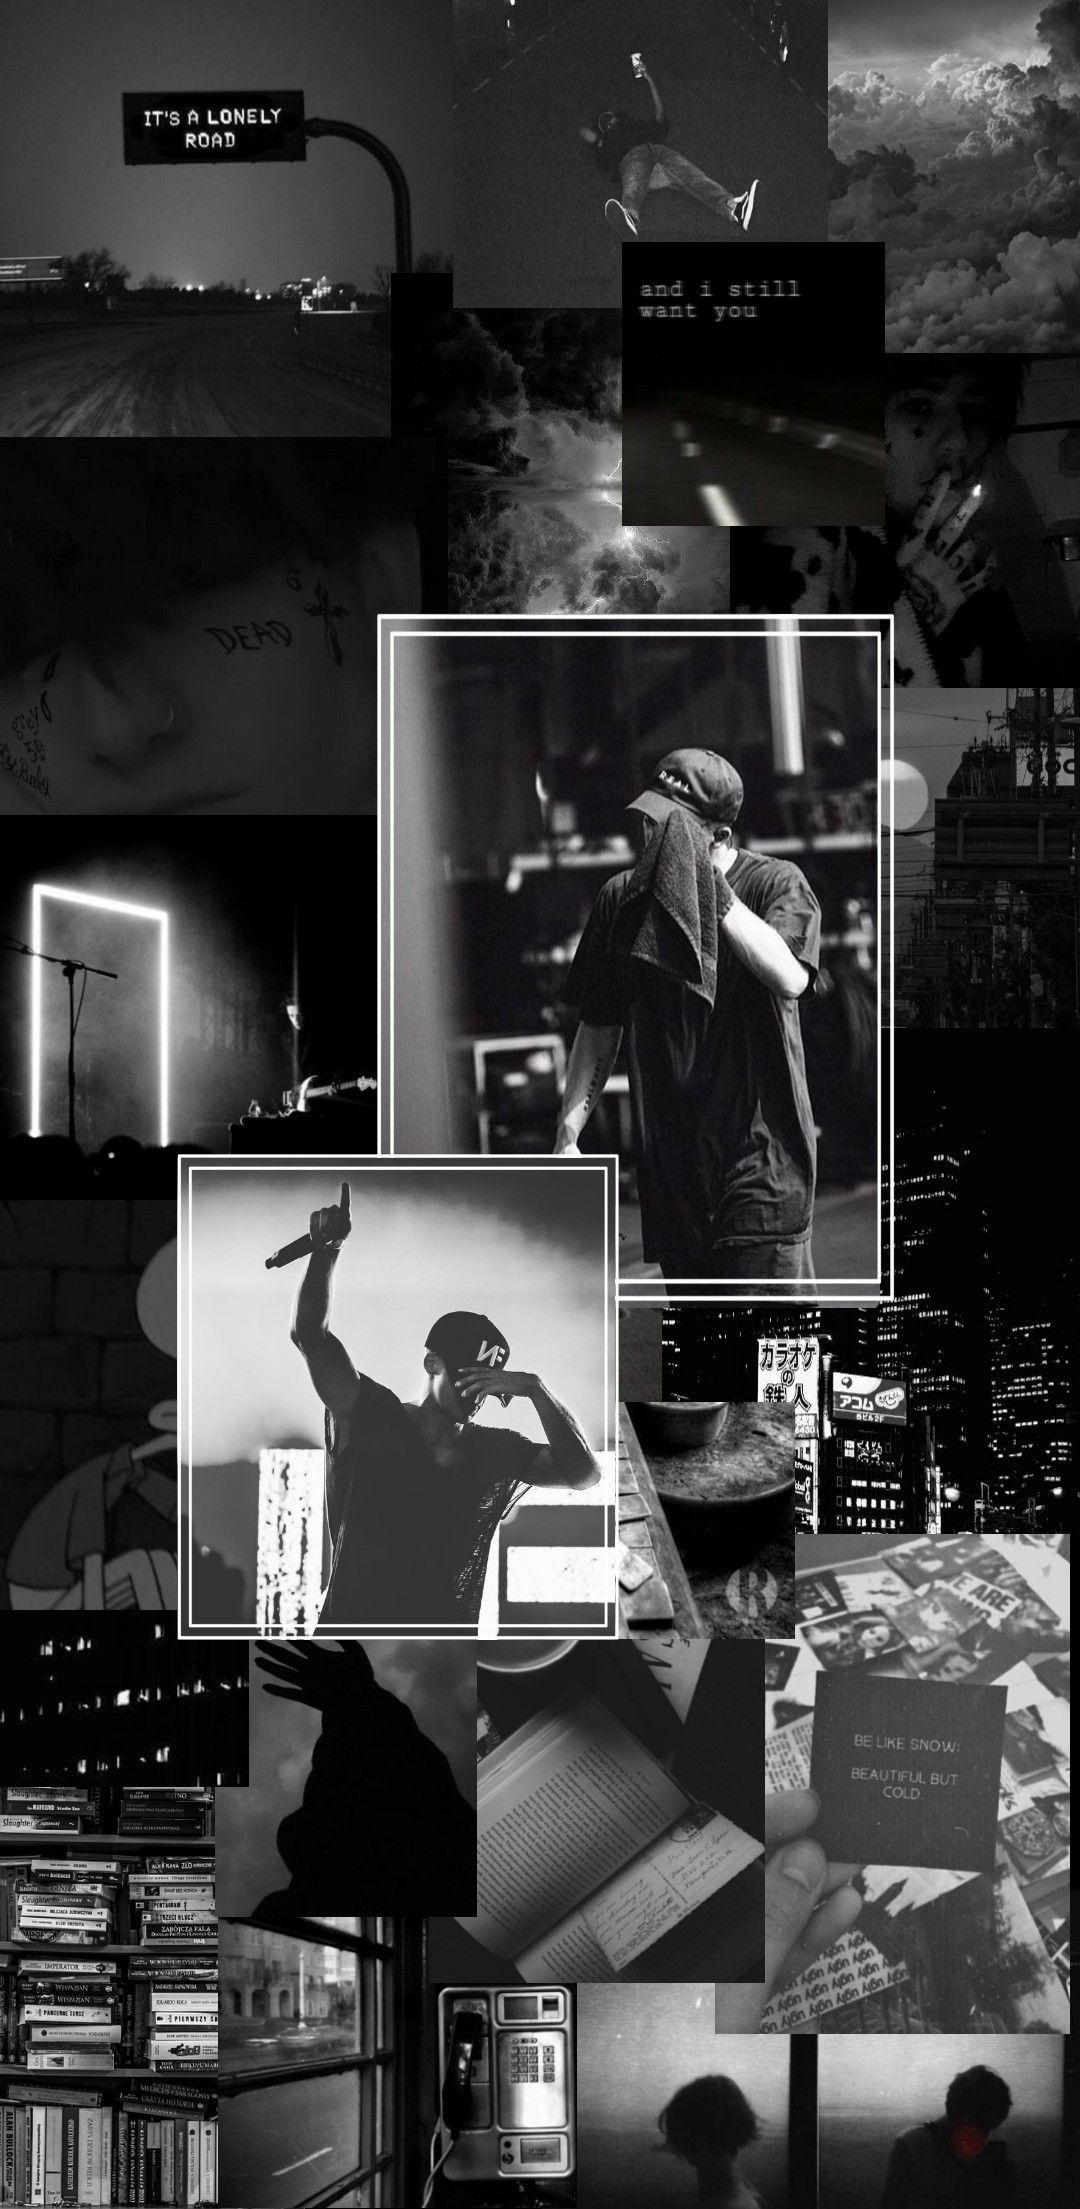 Nf real music aesthetic wallpaper black and white. Music wallpaper, Dark background wallpaper, Black aesthetic wallpaper